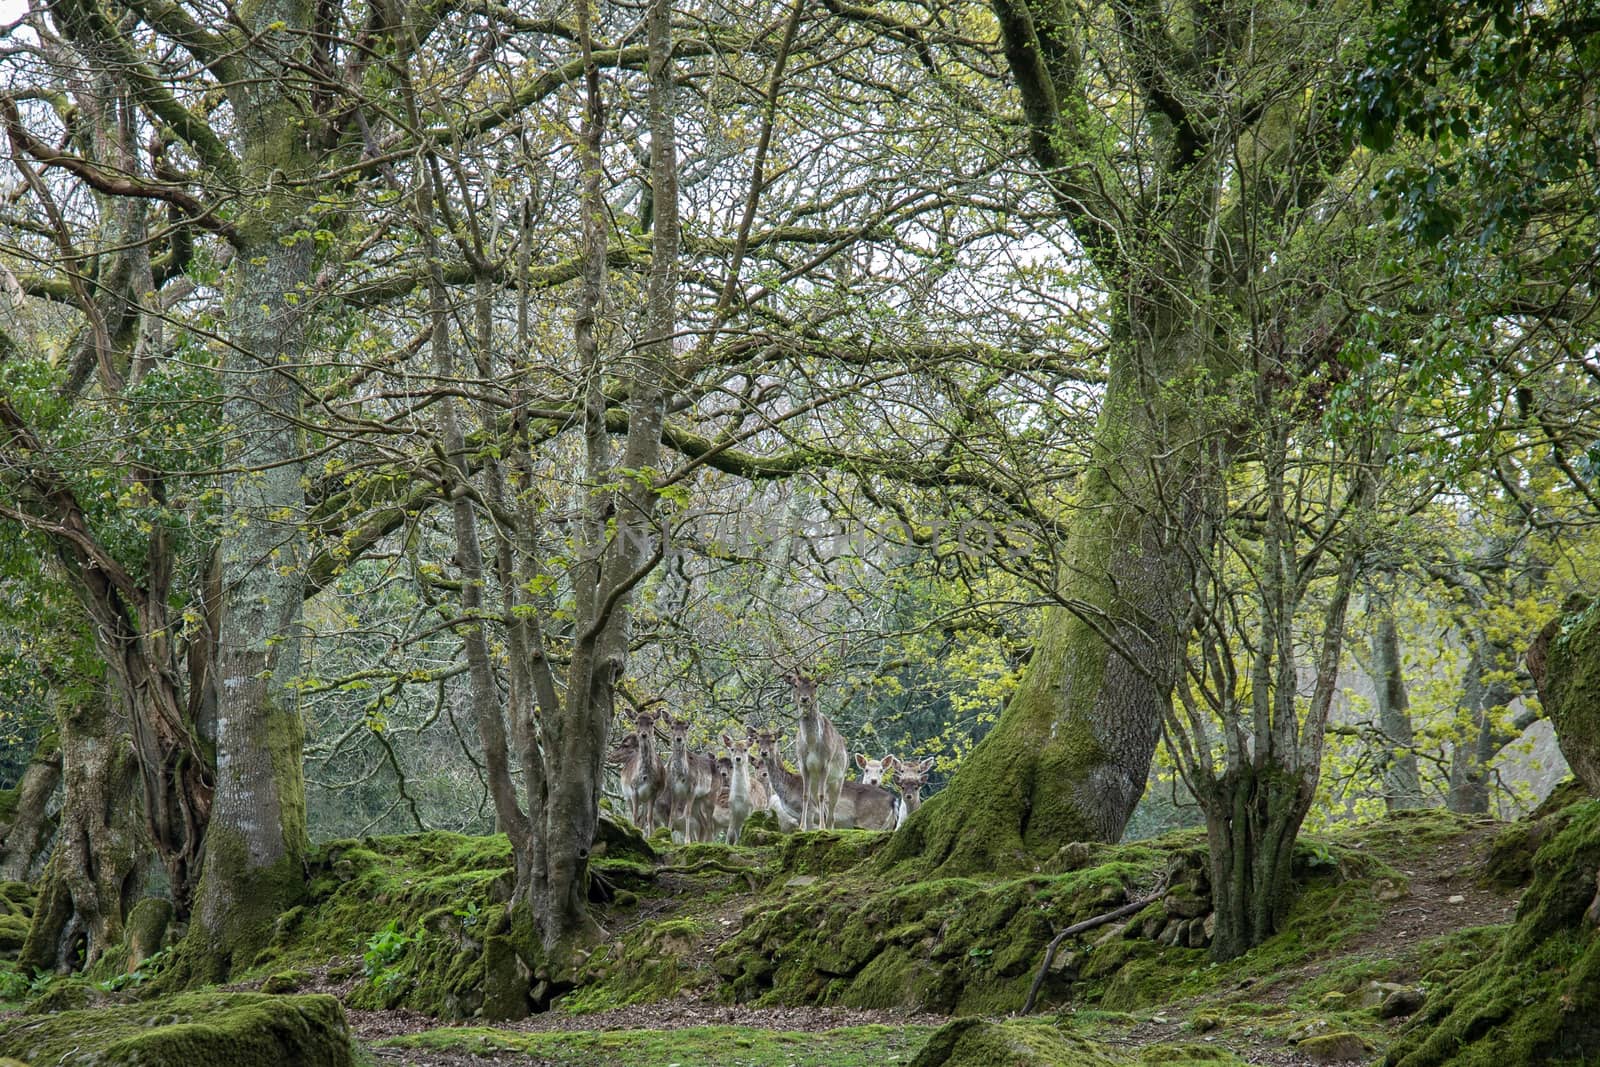 Herd of shy Fallow deer among the trees of a forest in Cornwall, UK